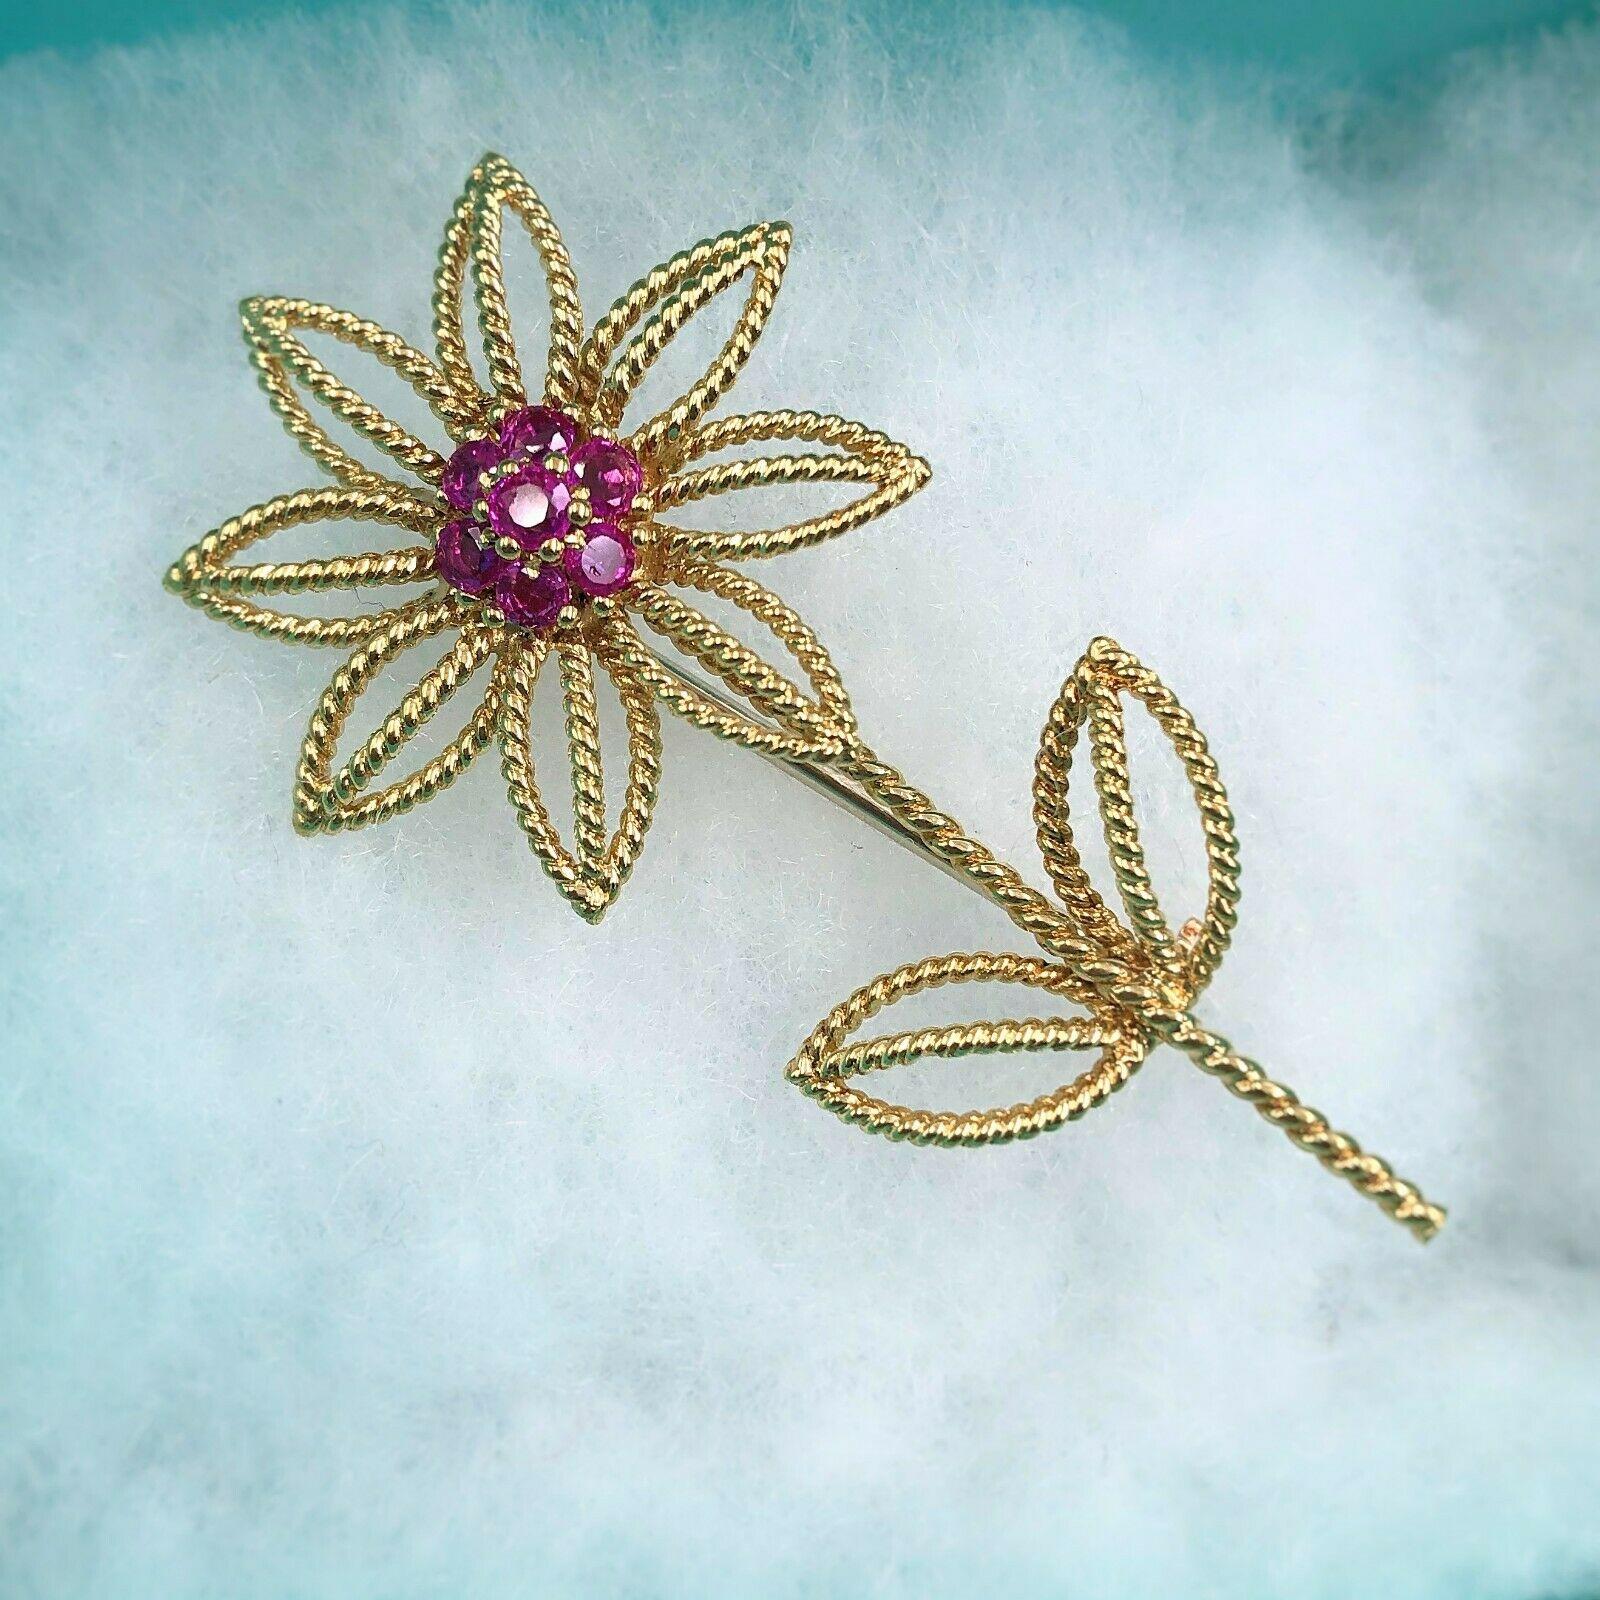 Round Cut Authentic Vintage 1960s Tiffany & Co 18 Karat Gold Flower Brooch with Rubies